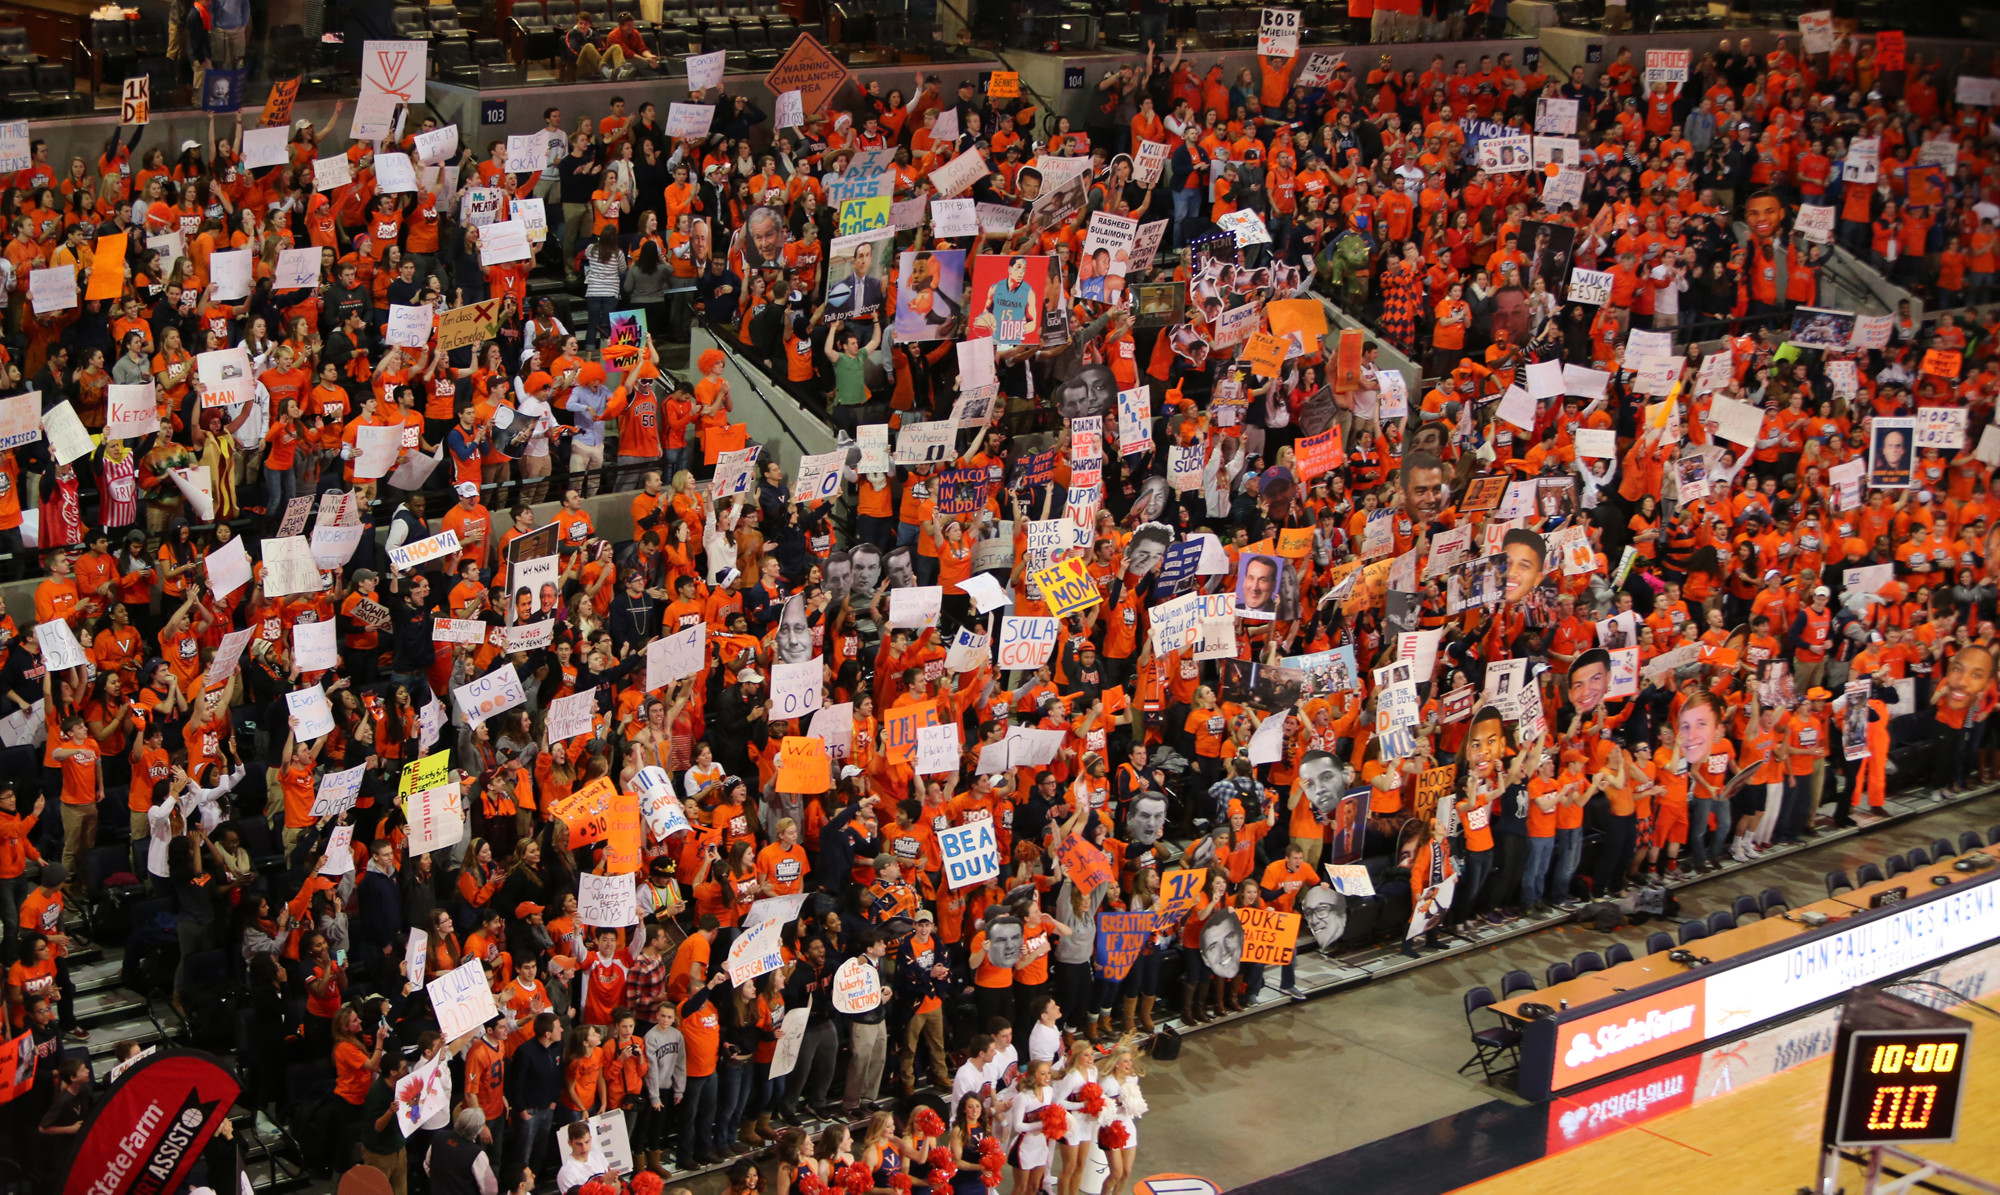 UVA Fans dressed in orange holding signs and cheering during college Gameday at a basketball game